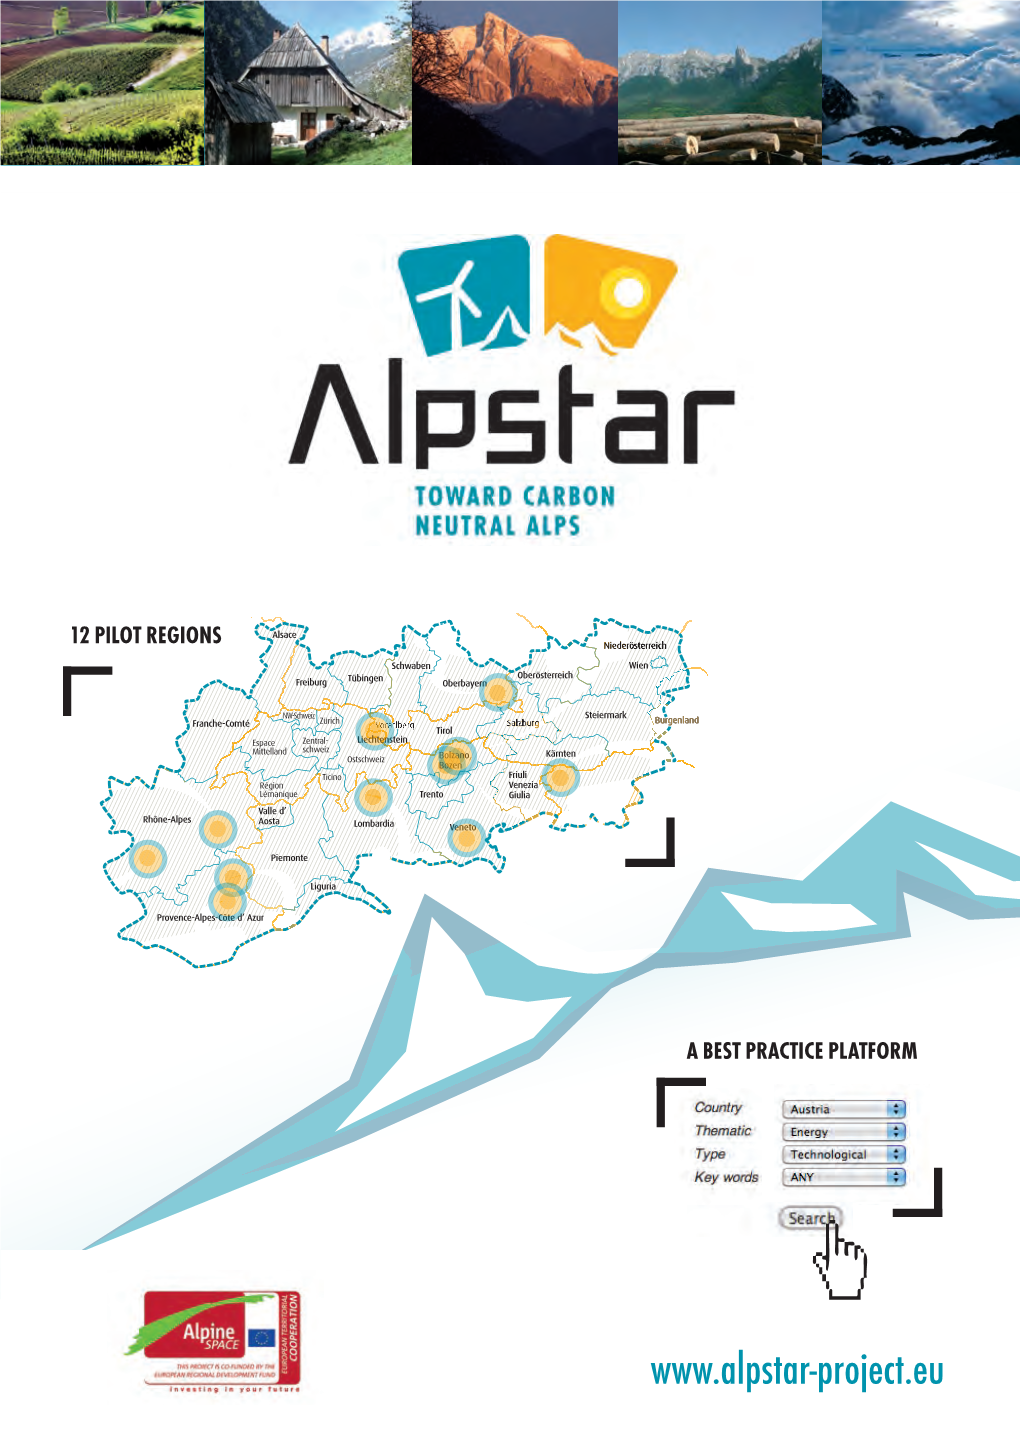 Alpstar: a Contribution to the Climate Action Plan of Alpine Convention